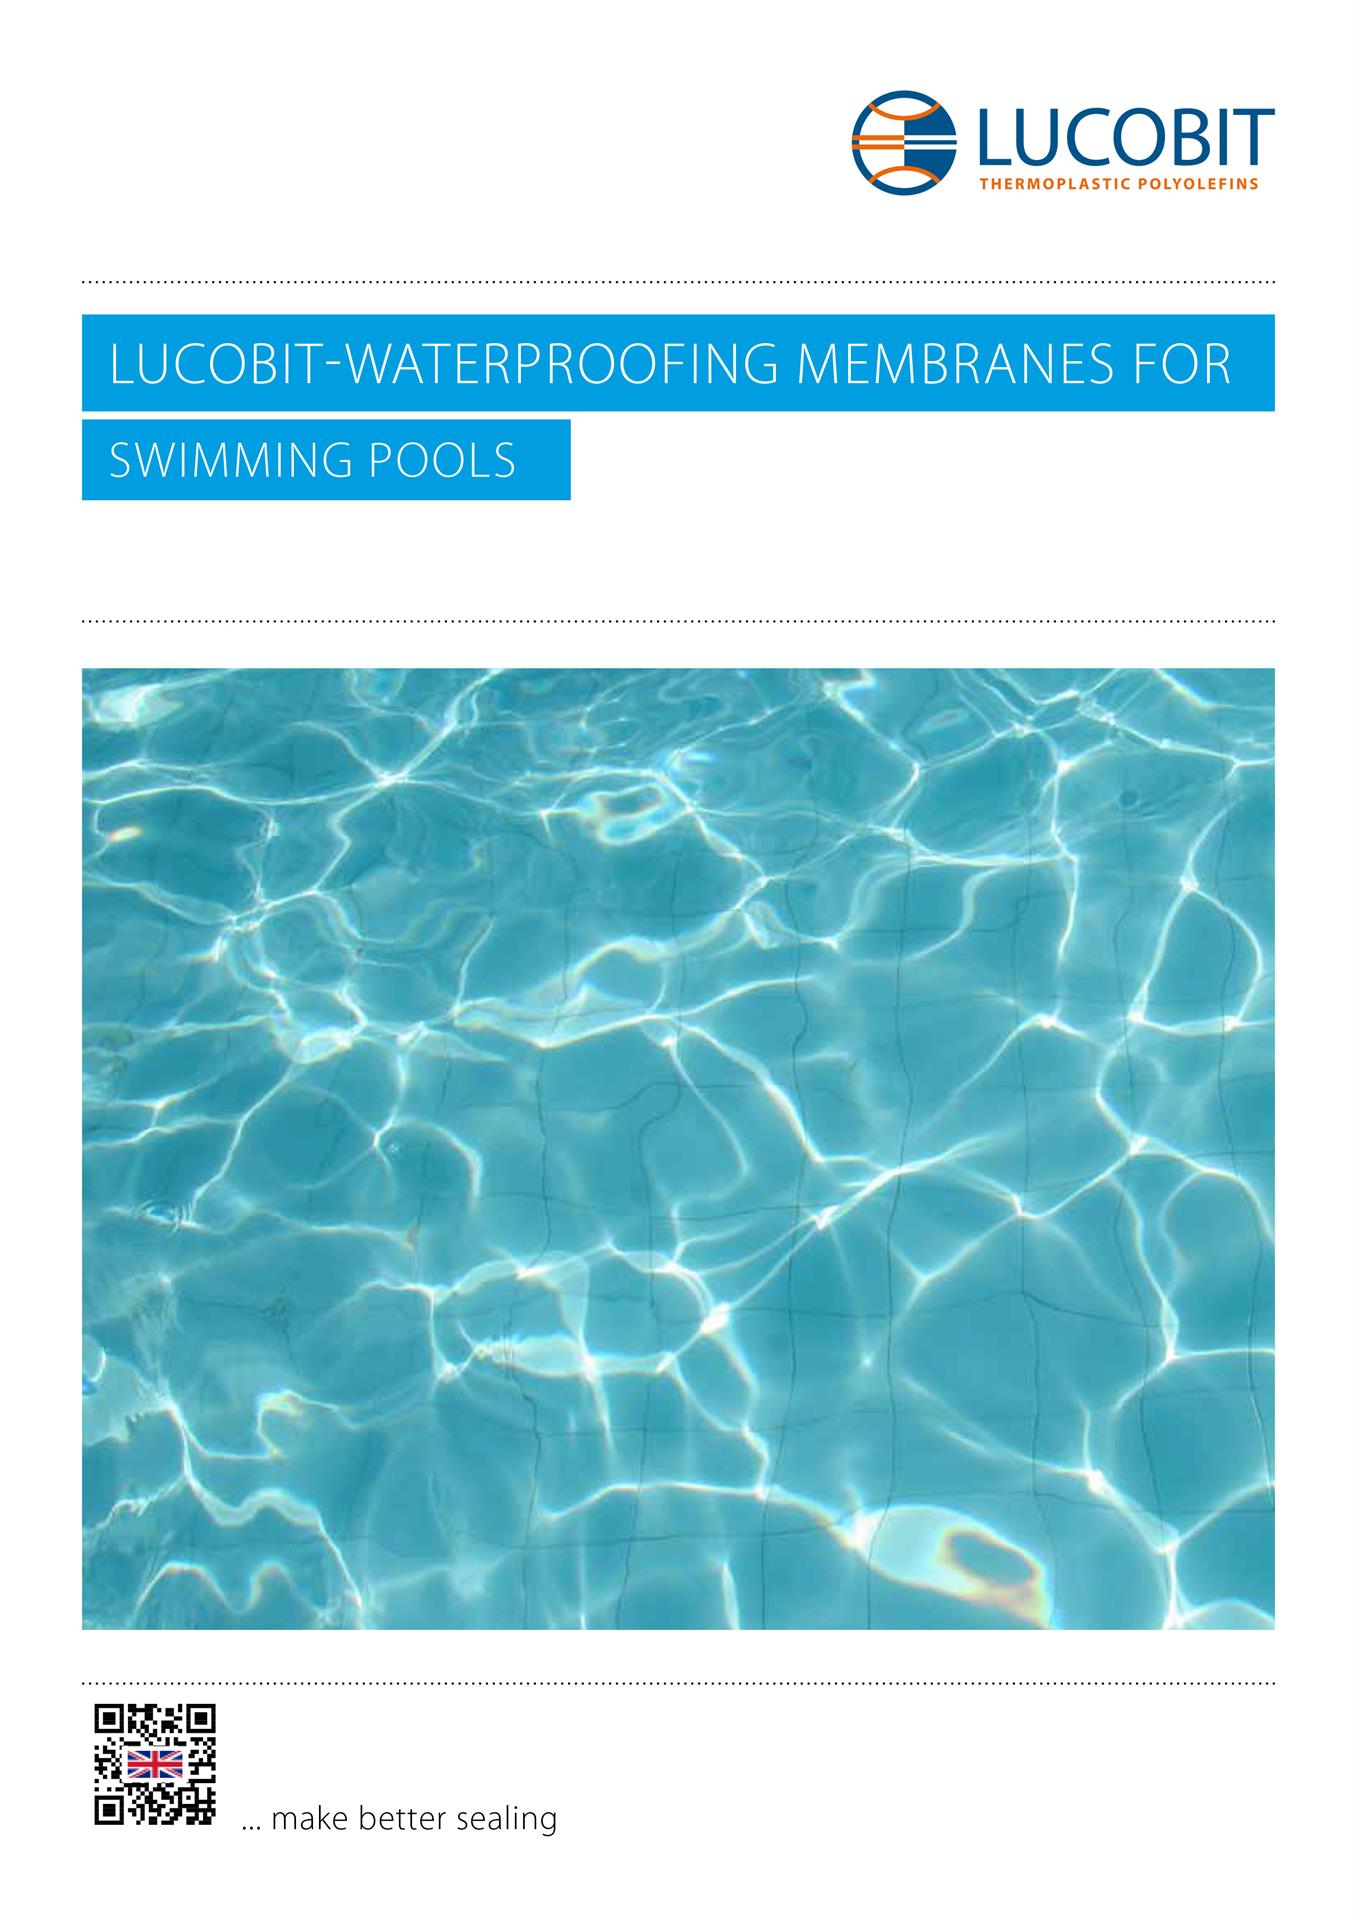 LUCOBIT Broschüre - LUCOBIT-WATERPROOFING MEMBRANES FOR SWIMMING POOLS